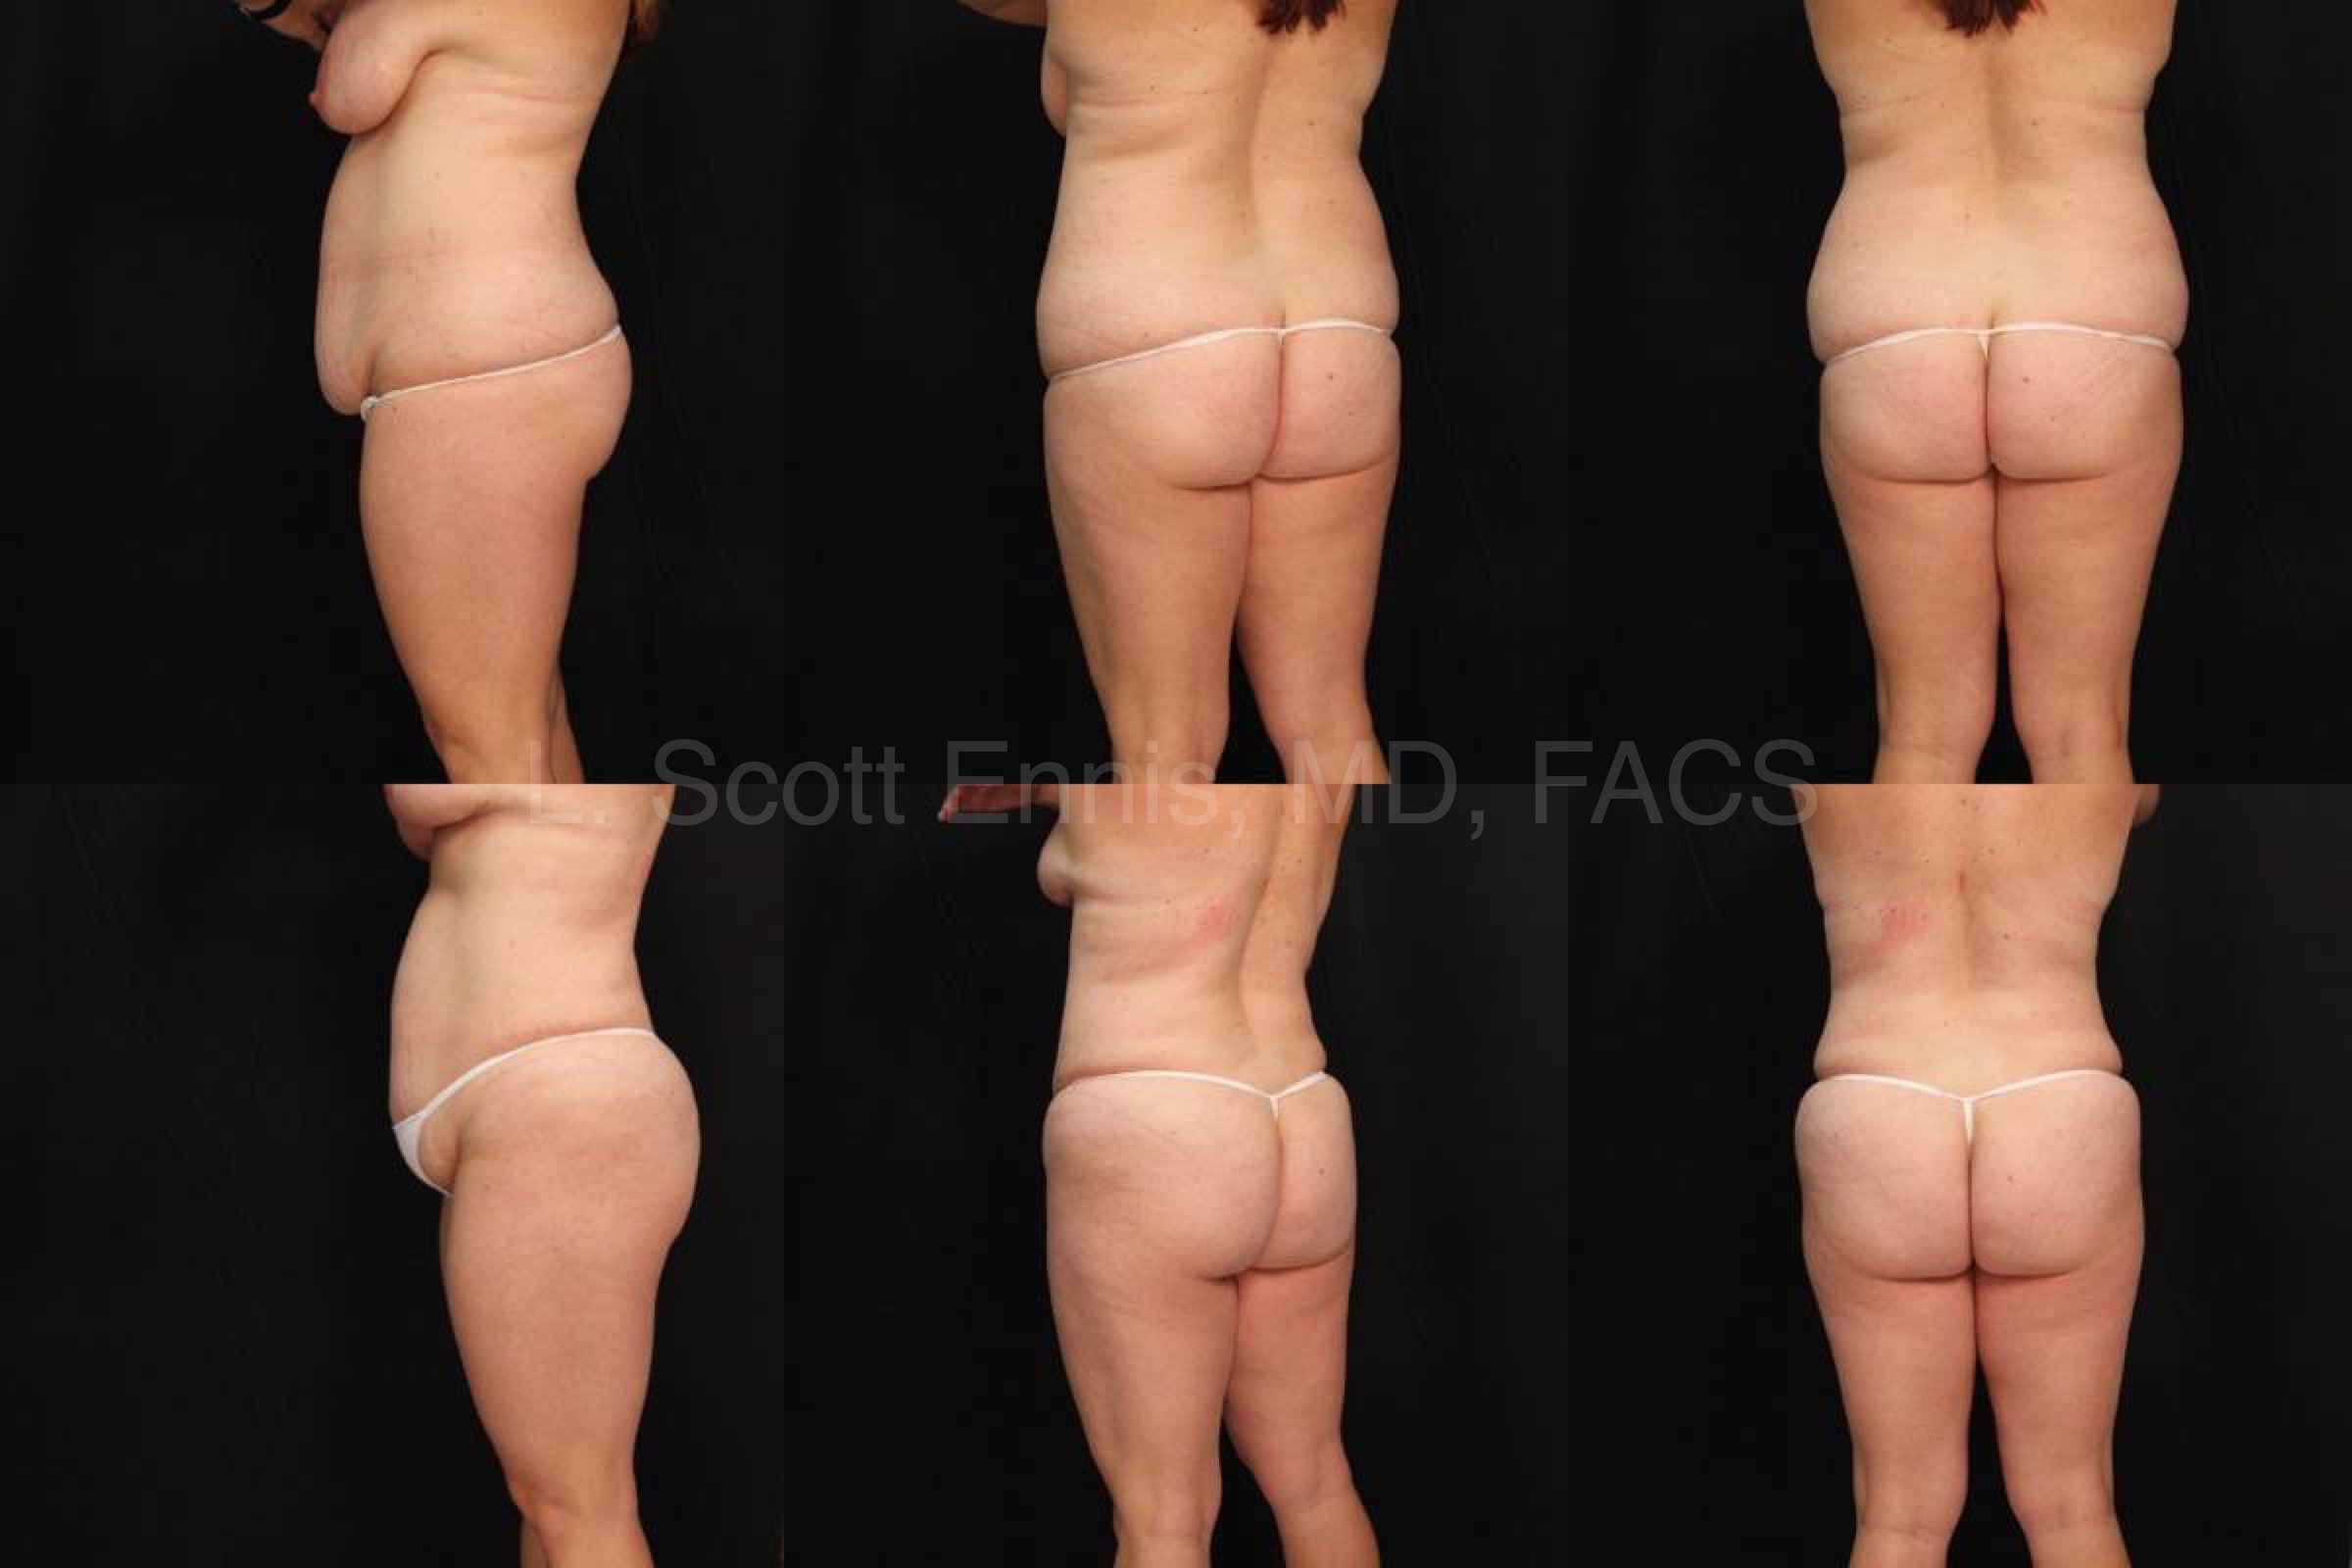 Liposuction of hips and breast reduction Before and After Ennis Plastic Surgery Palm Beach Boca Raton Destin Miami